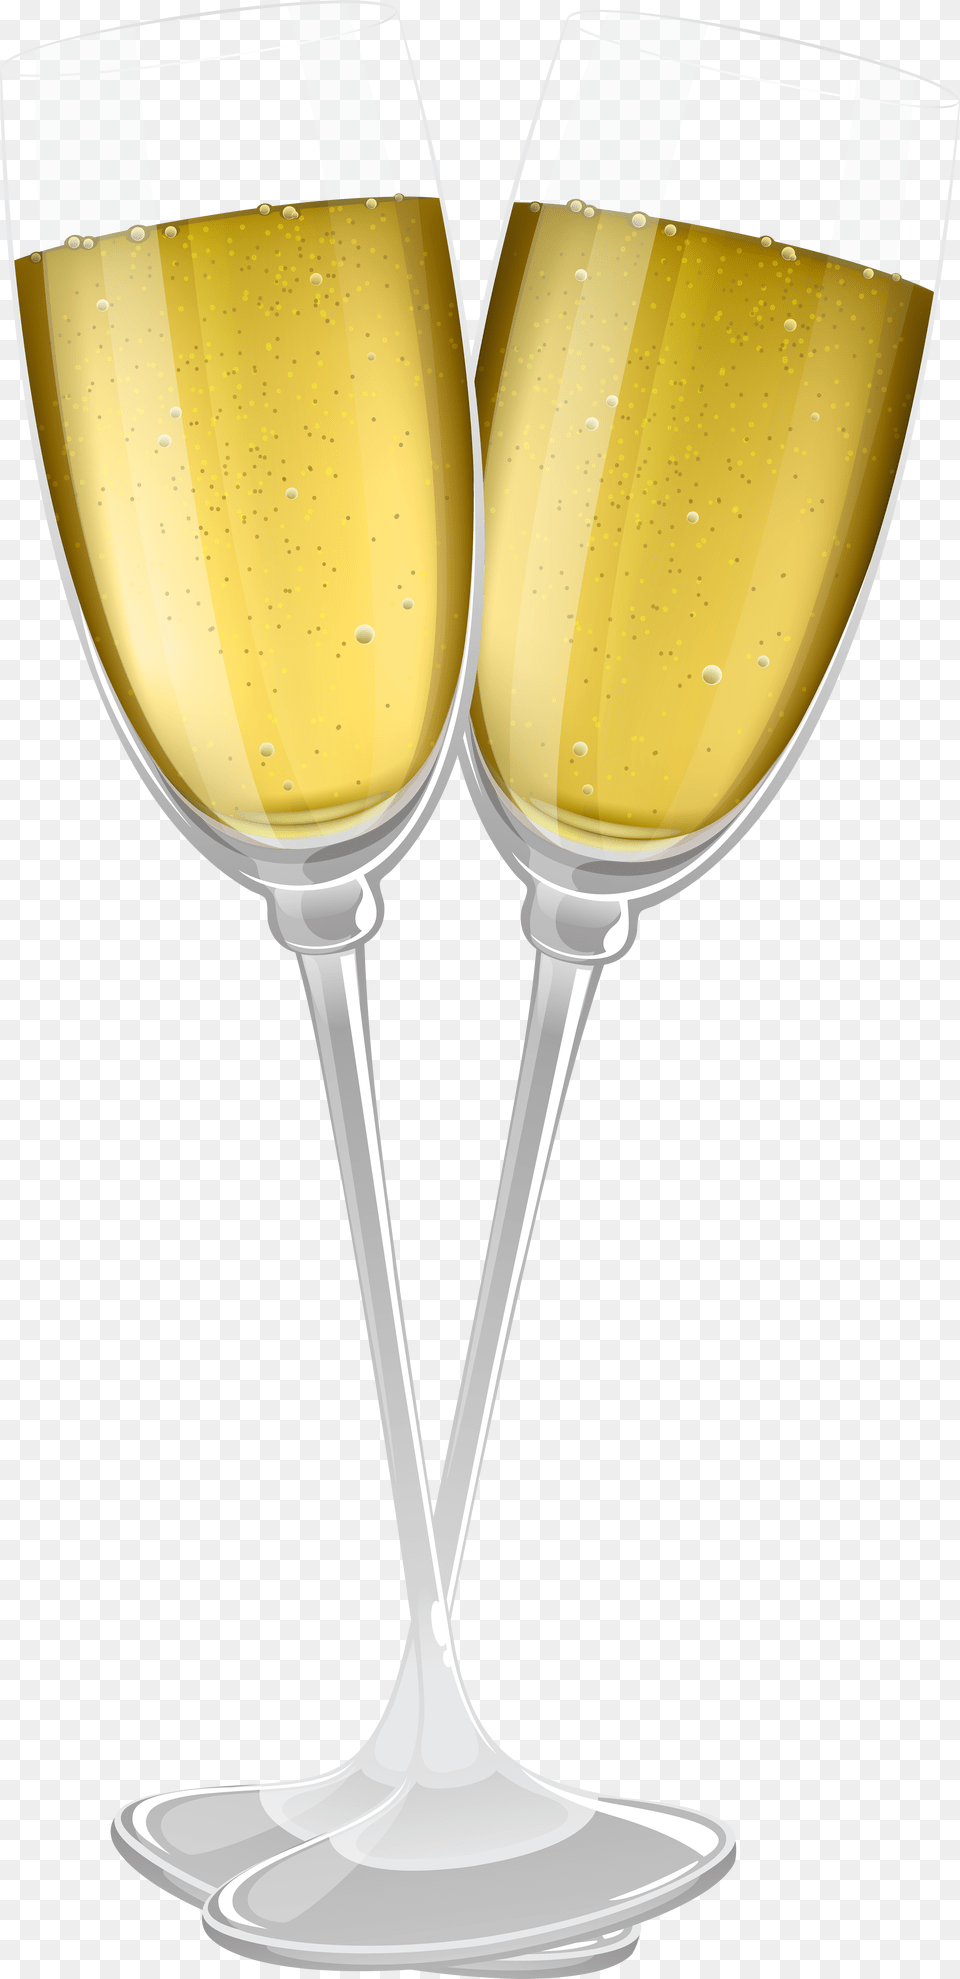 Glasses Of Champagne Transparent Wine Glass, Alcohol, Beverage, Liquor, Wine Glass Png Image